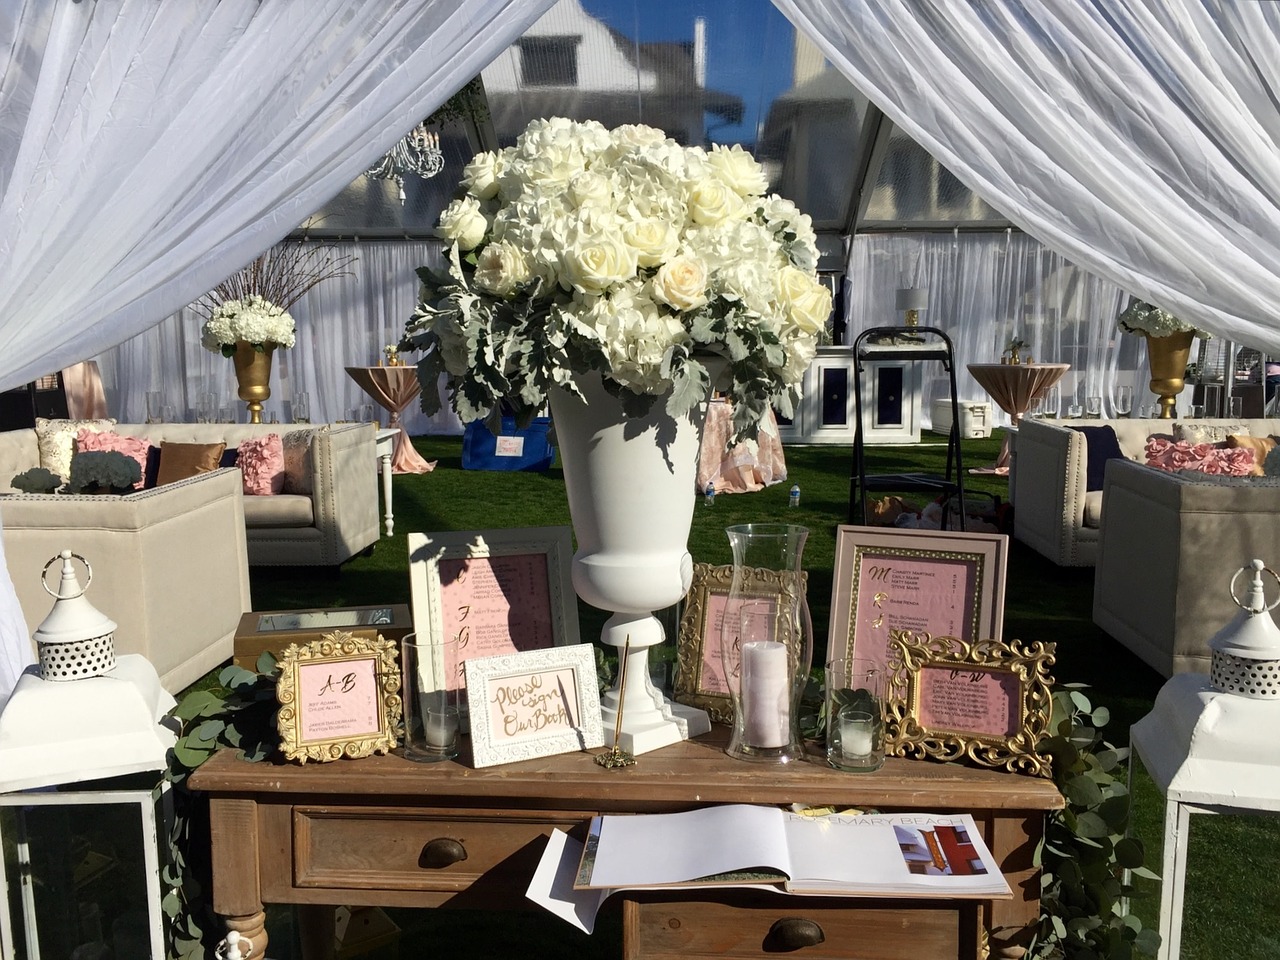 Wedding guest book table at a reception.